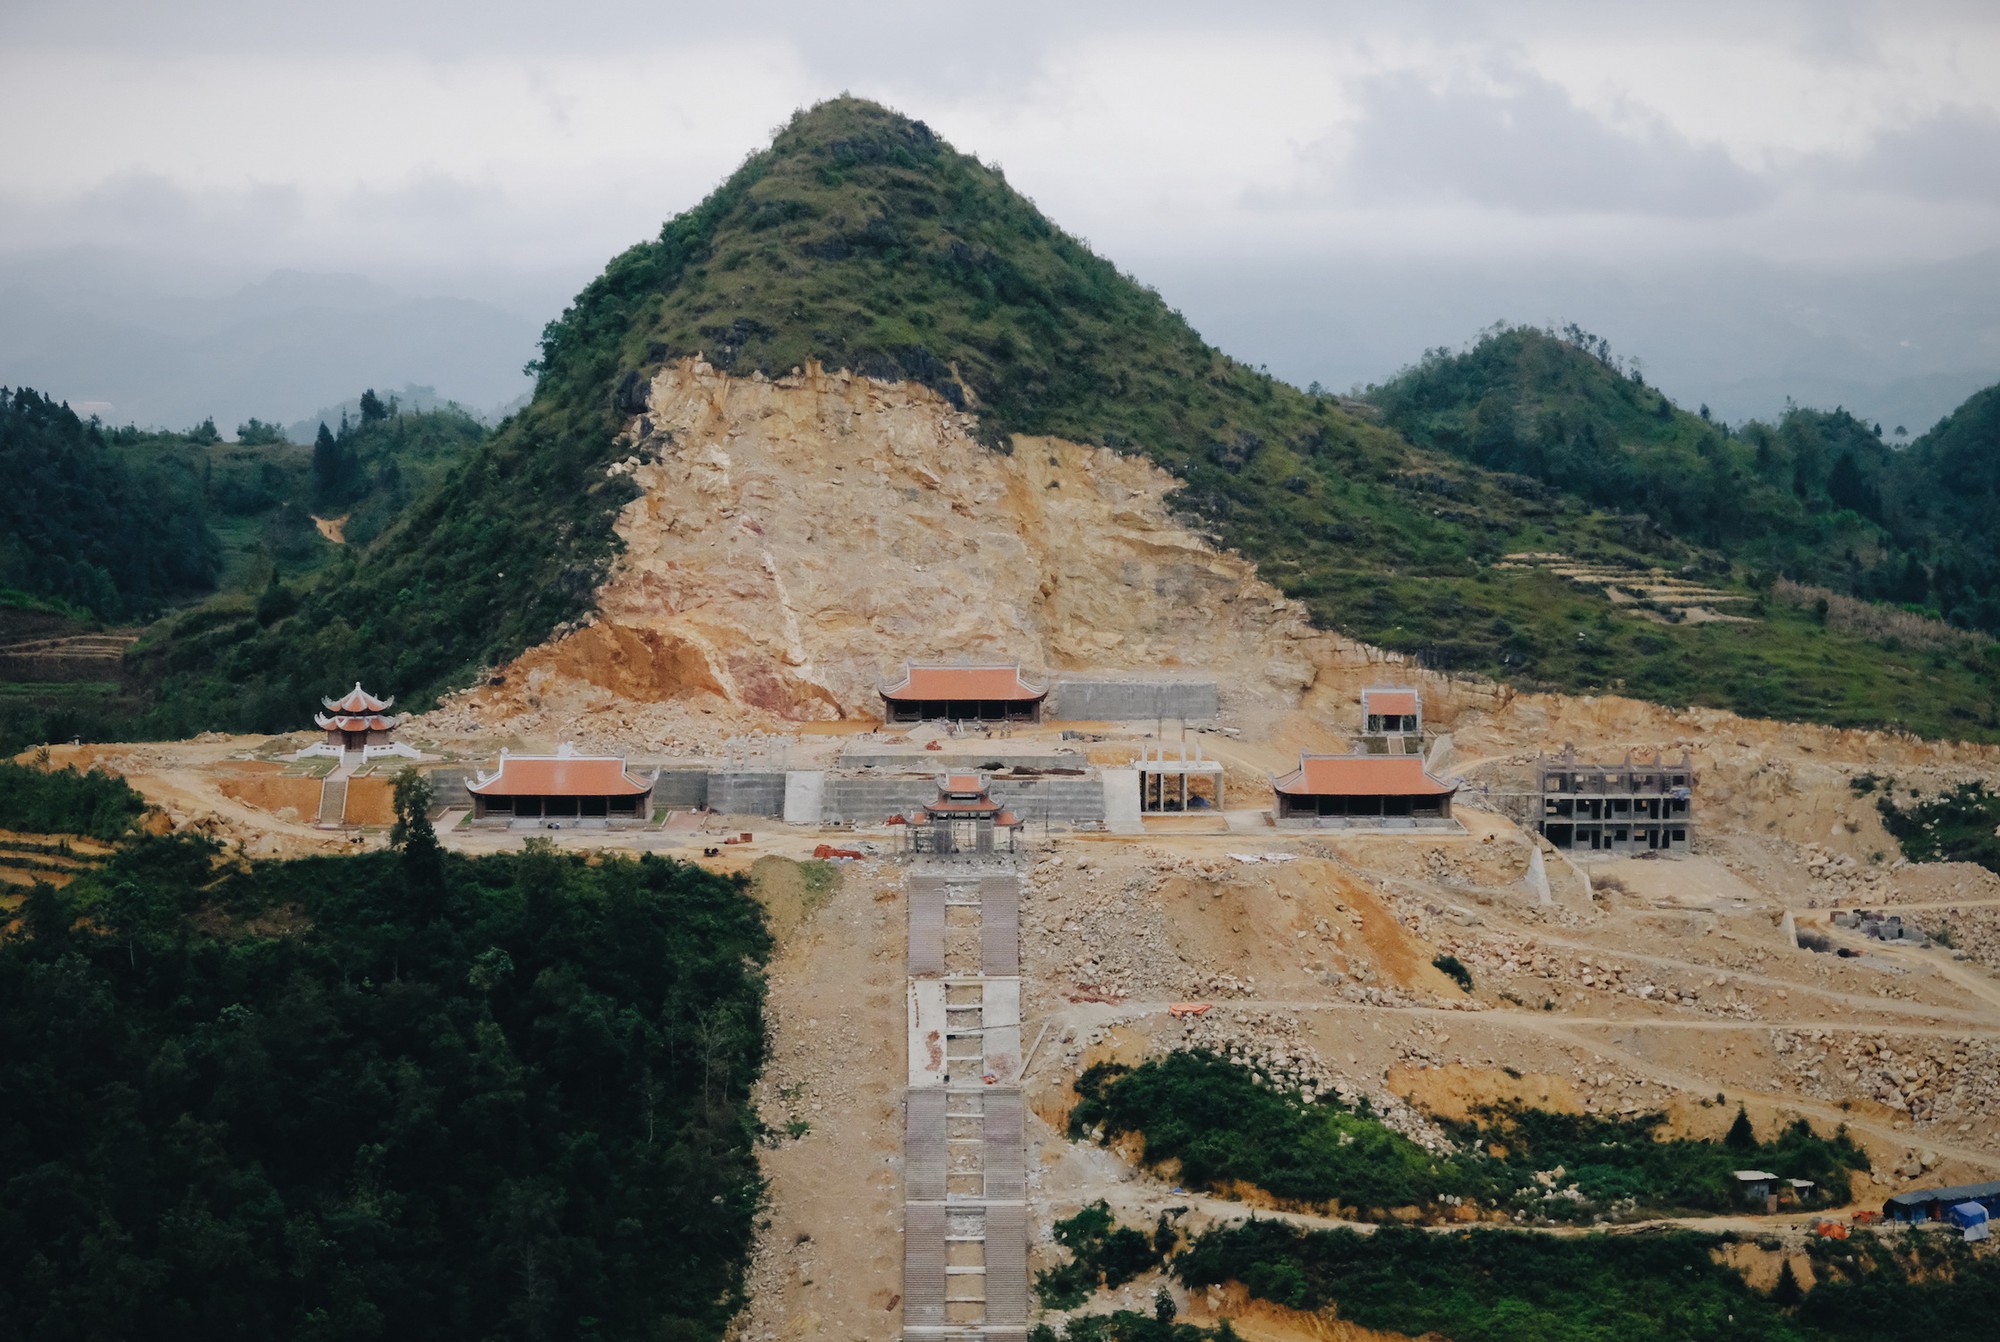 Mountain flattened for tourism project near Vietnam’s iconic flagpole